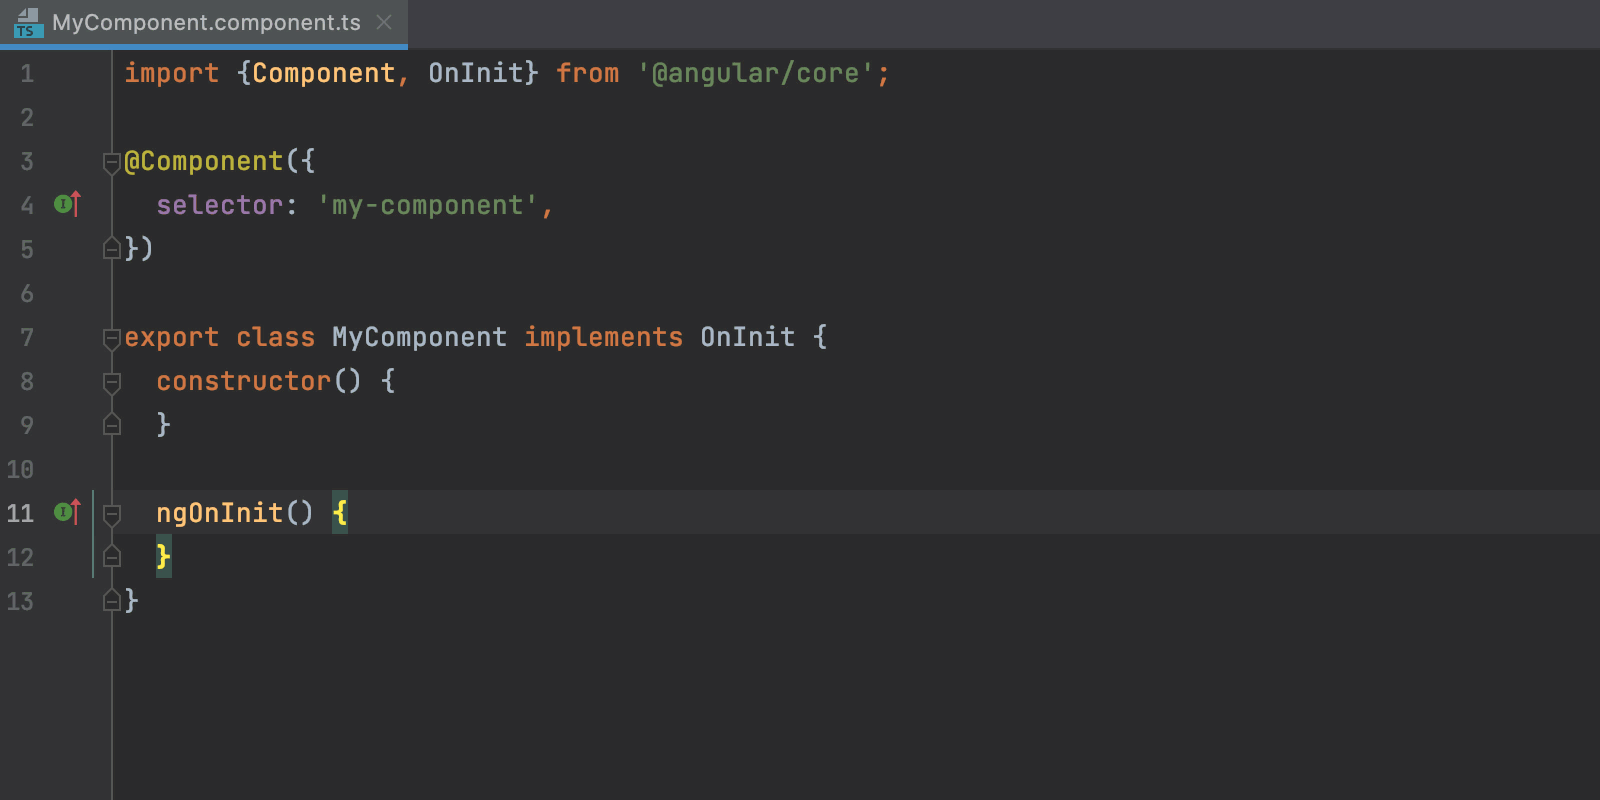 Code snippets: expand template with Skip if Defined selected